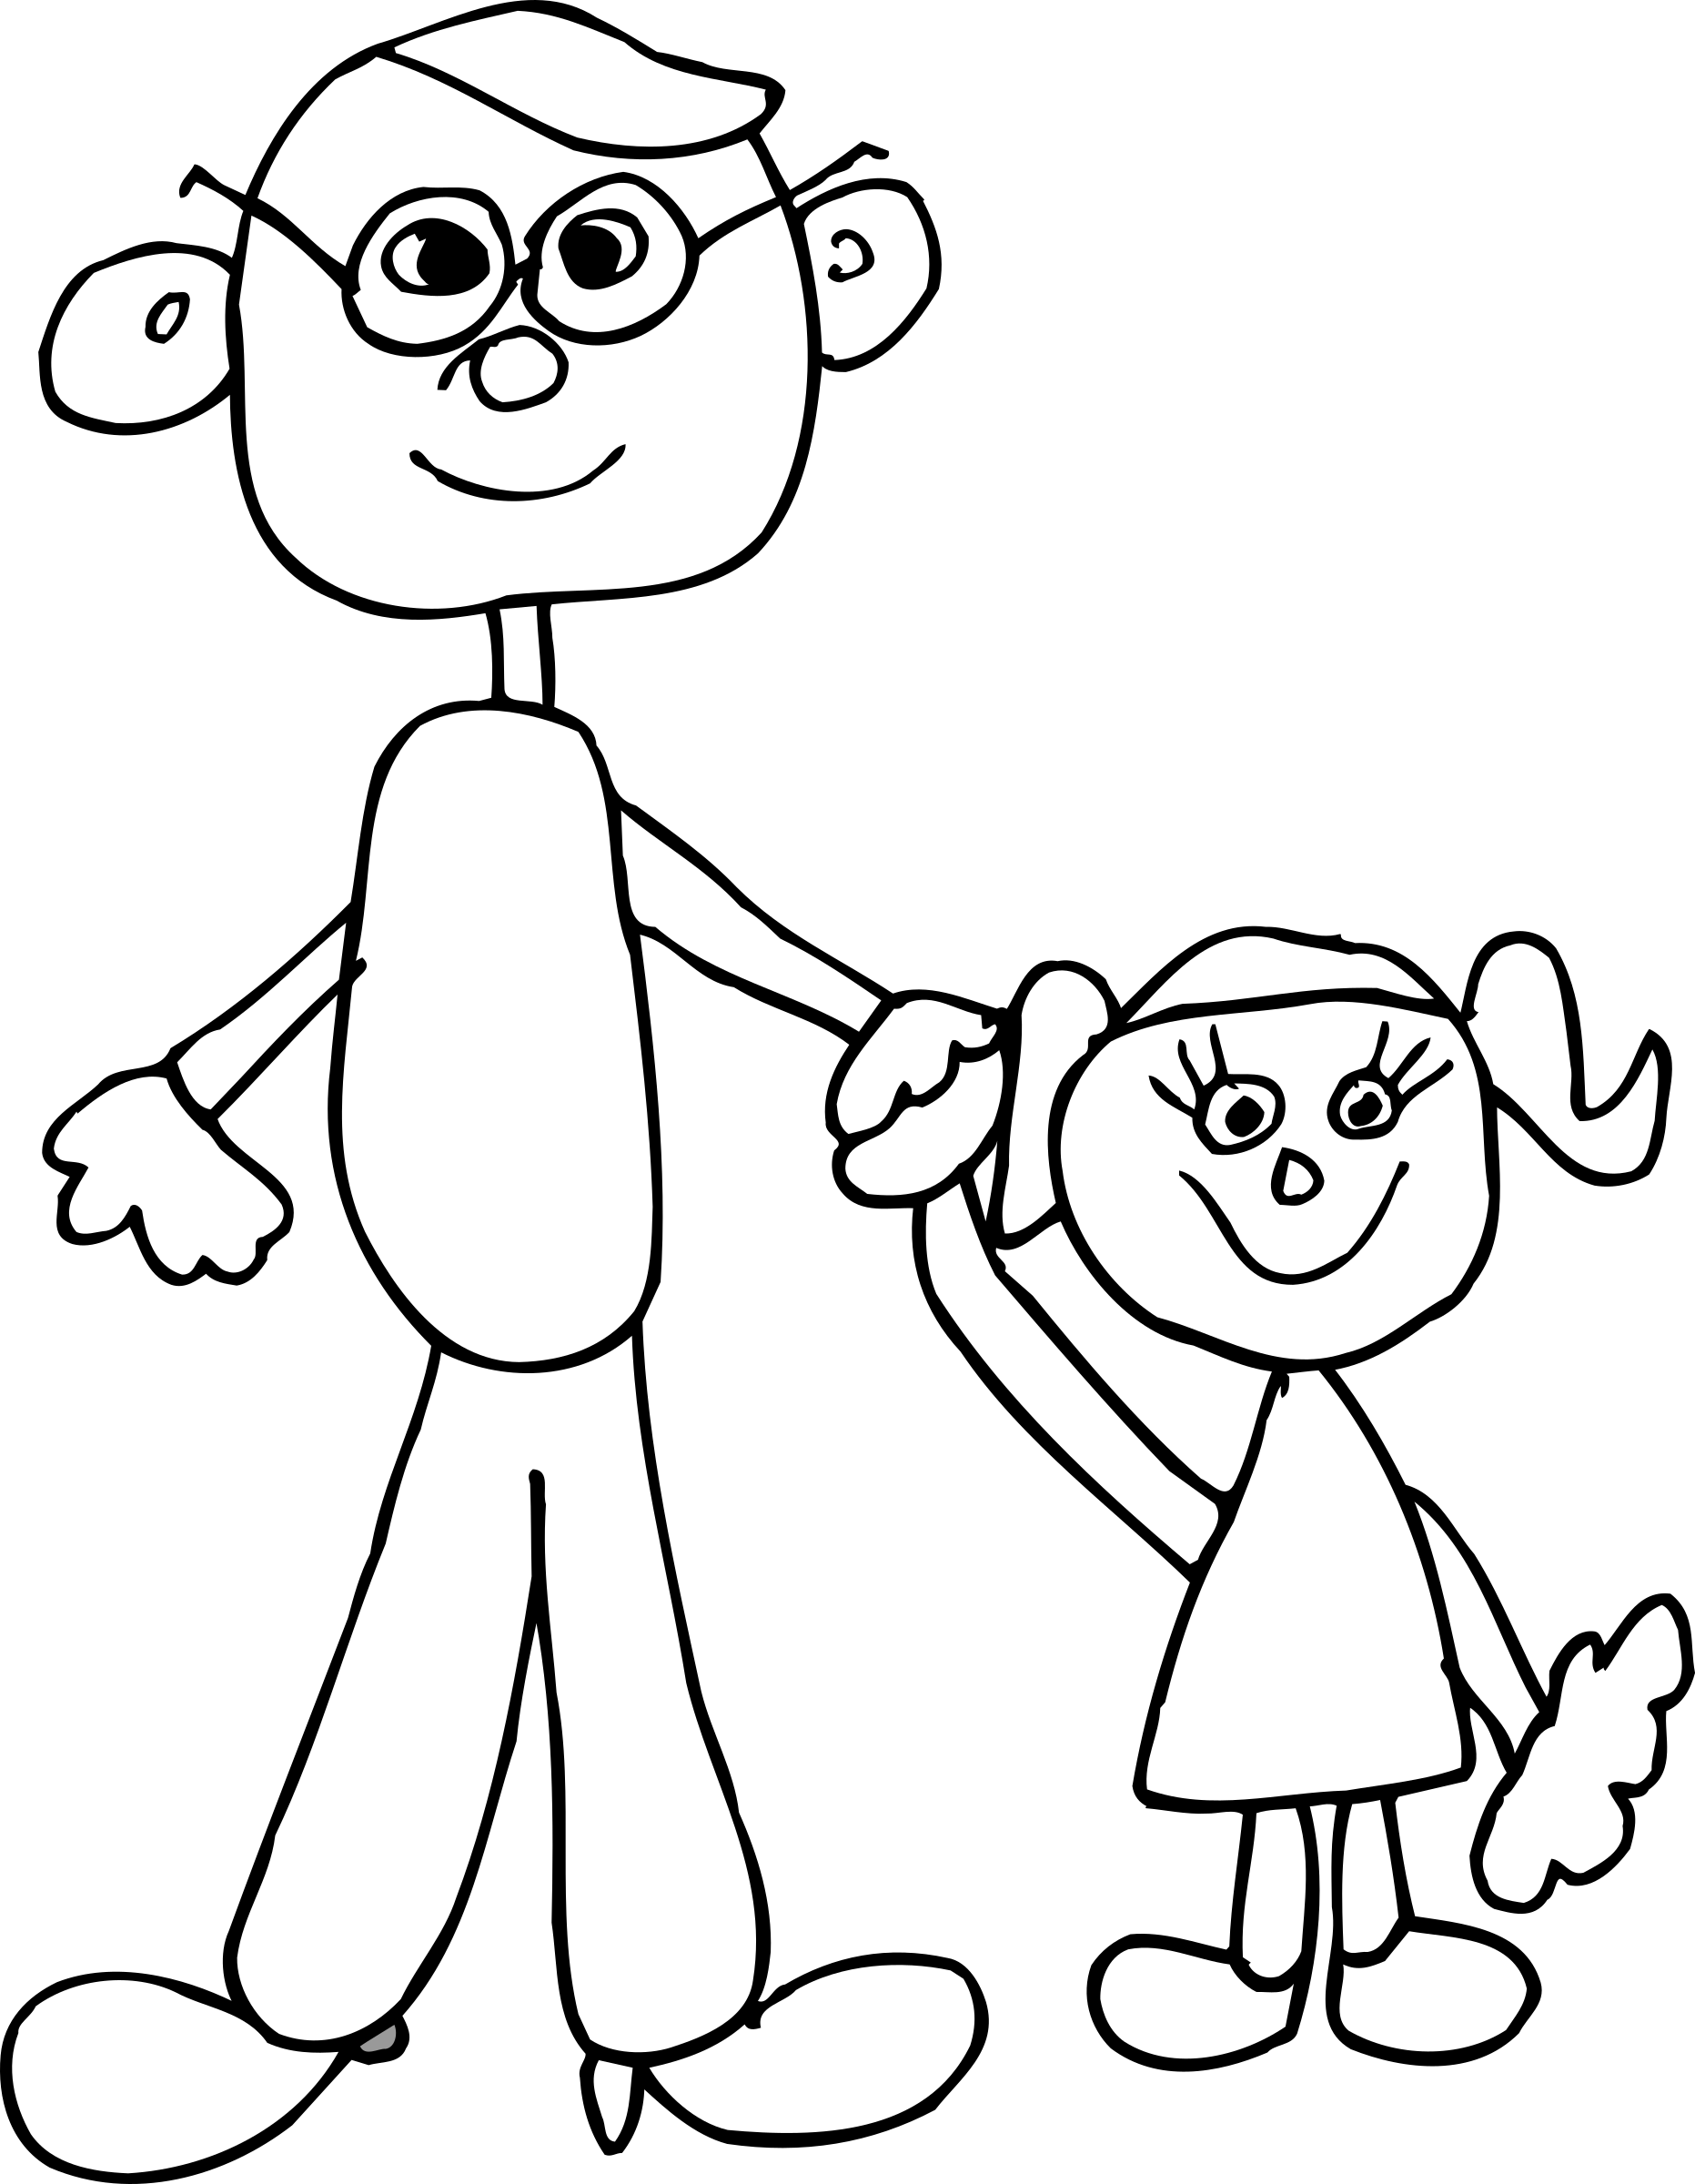 Dad holding daughters hand. Clipart face family